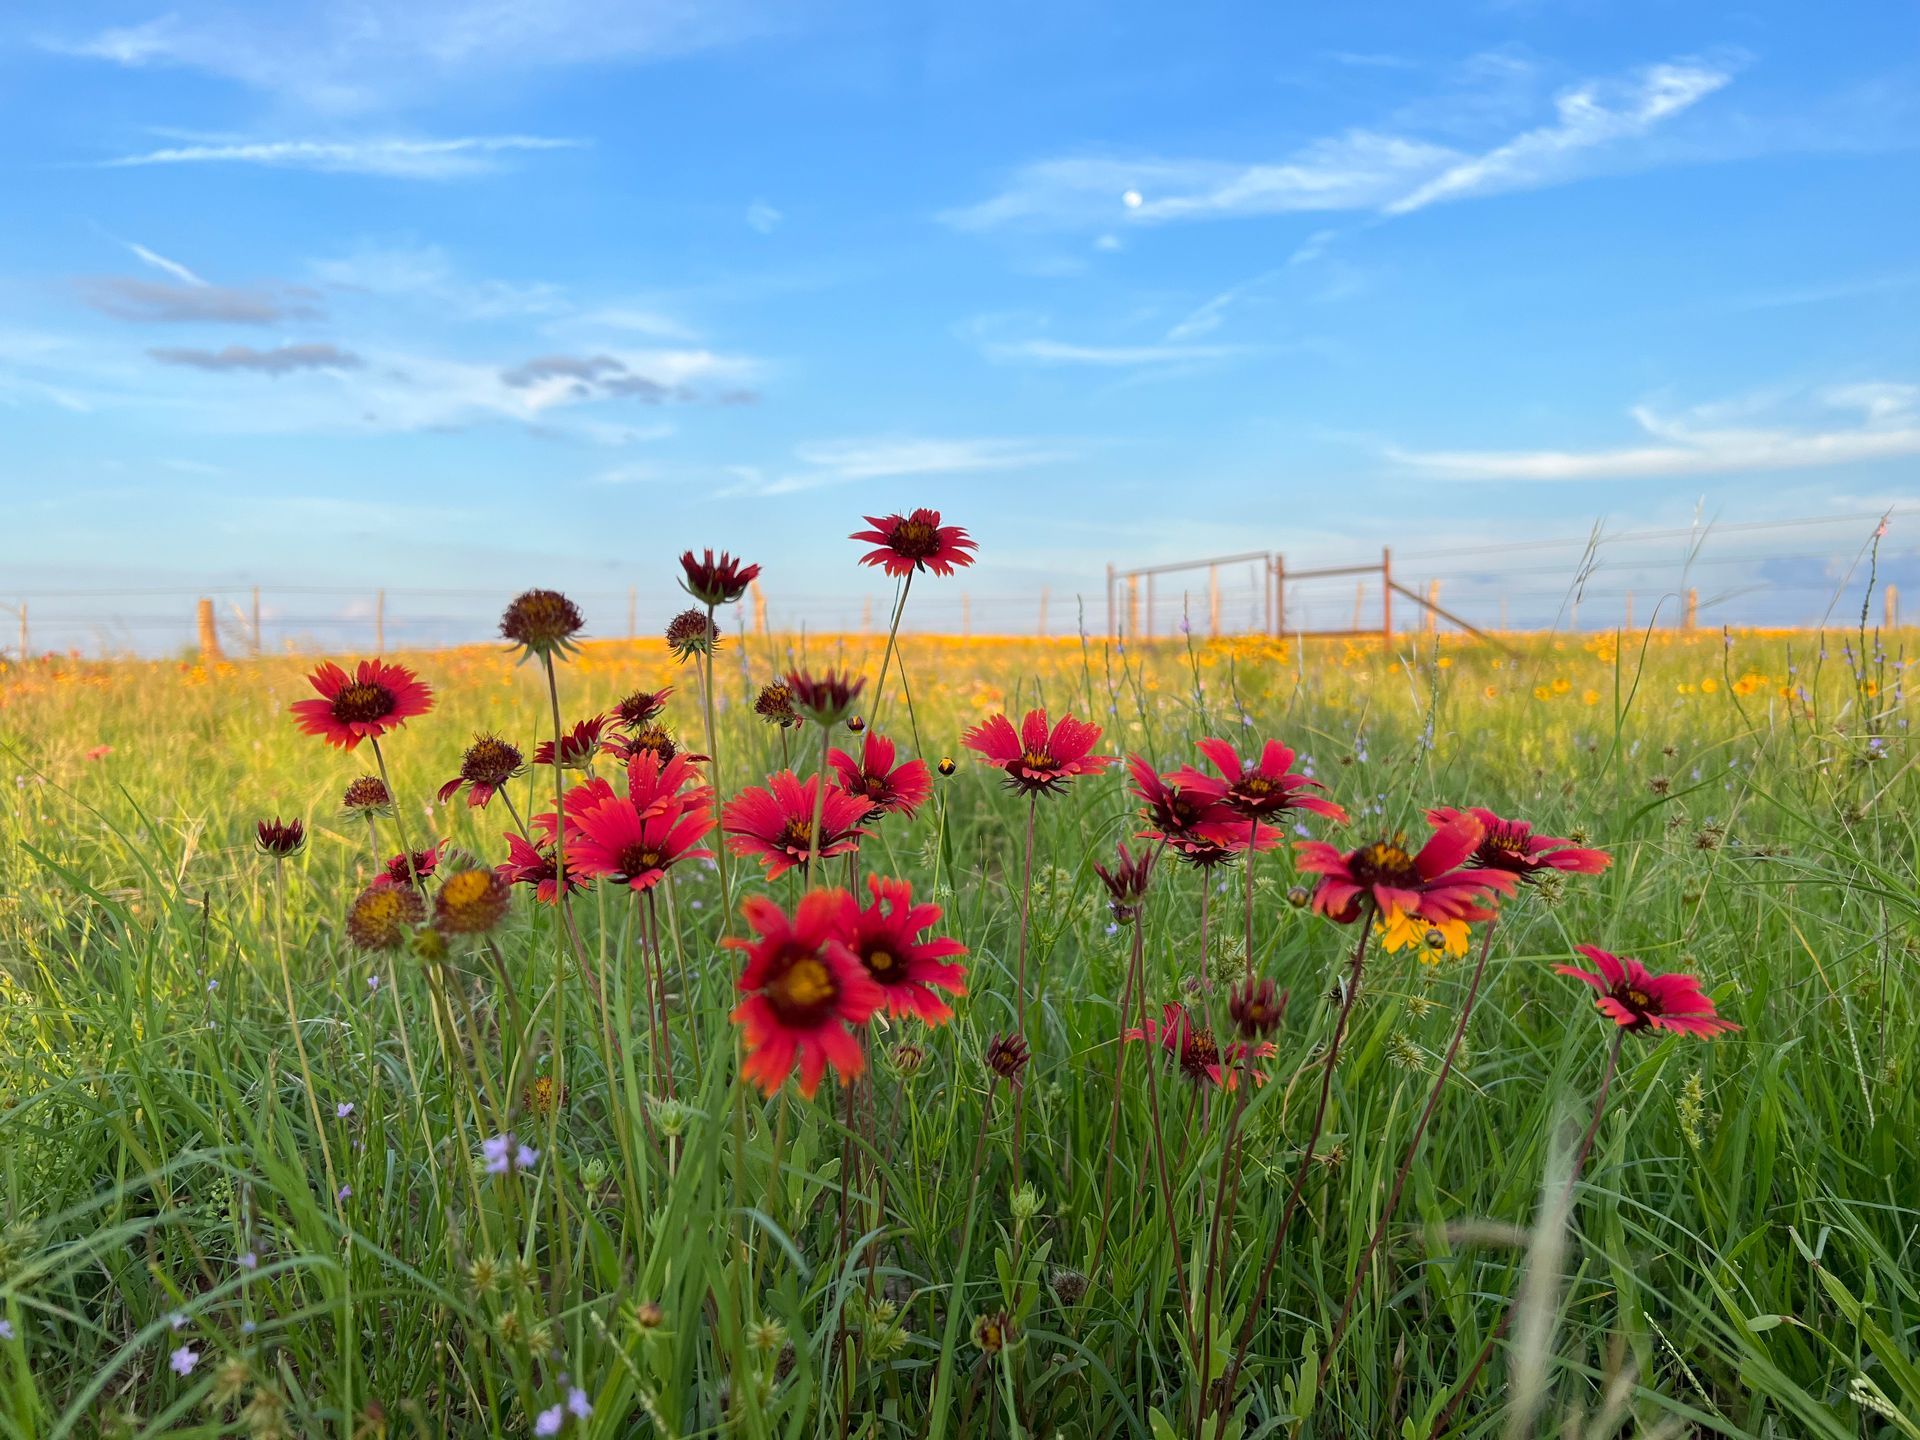 A field of red and yellow flowers with a fence in the background.